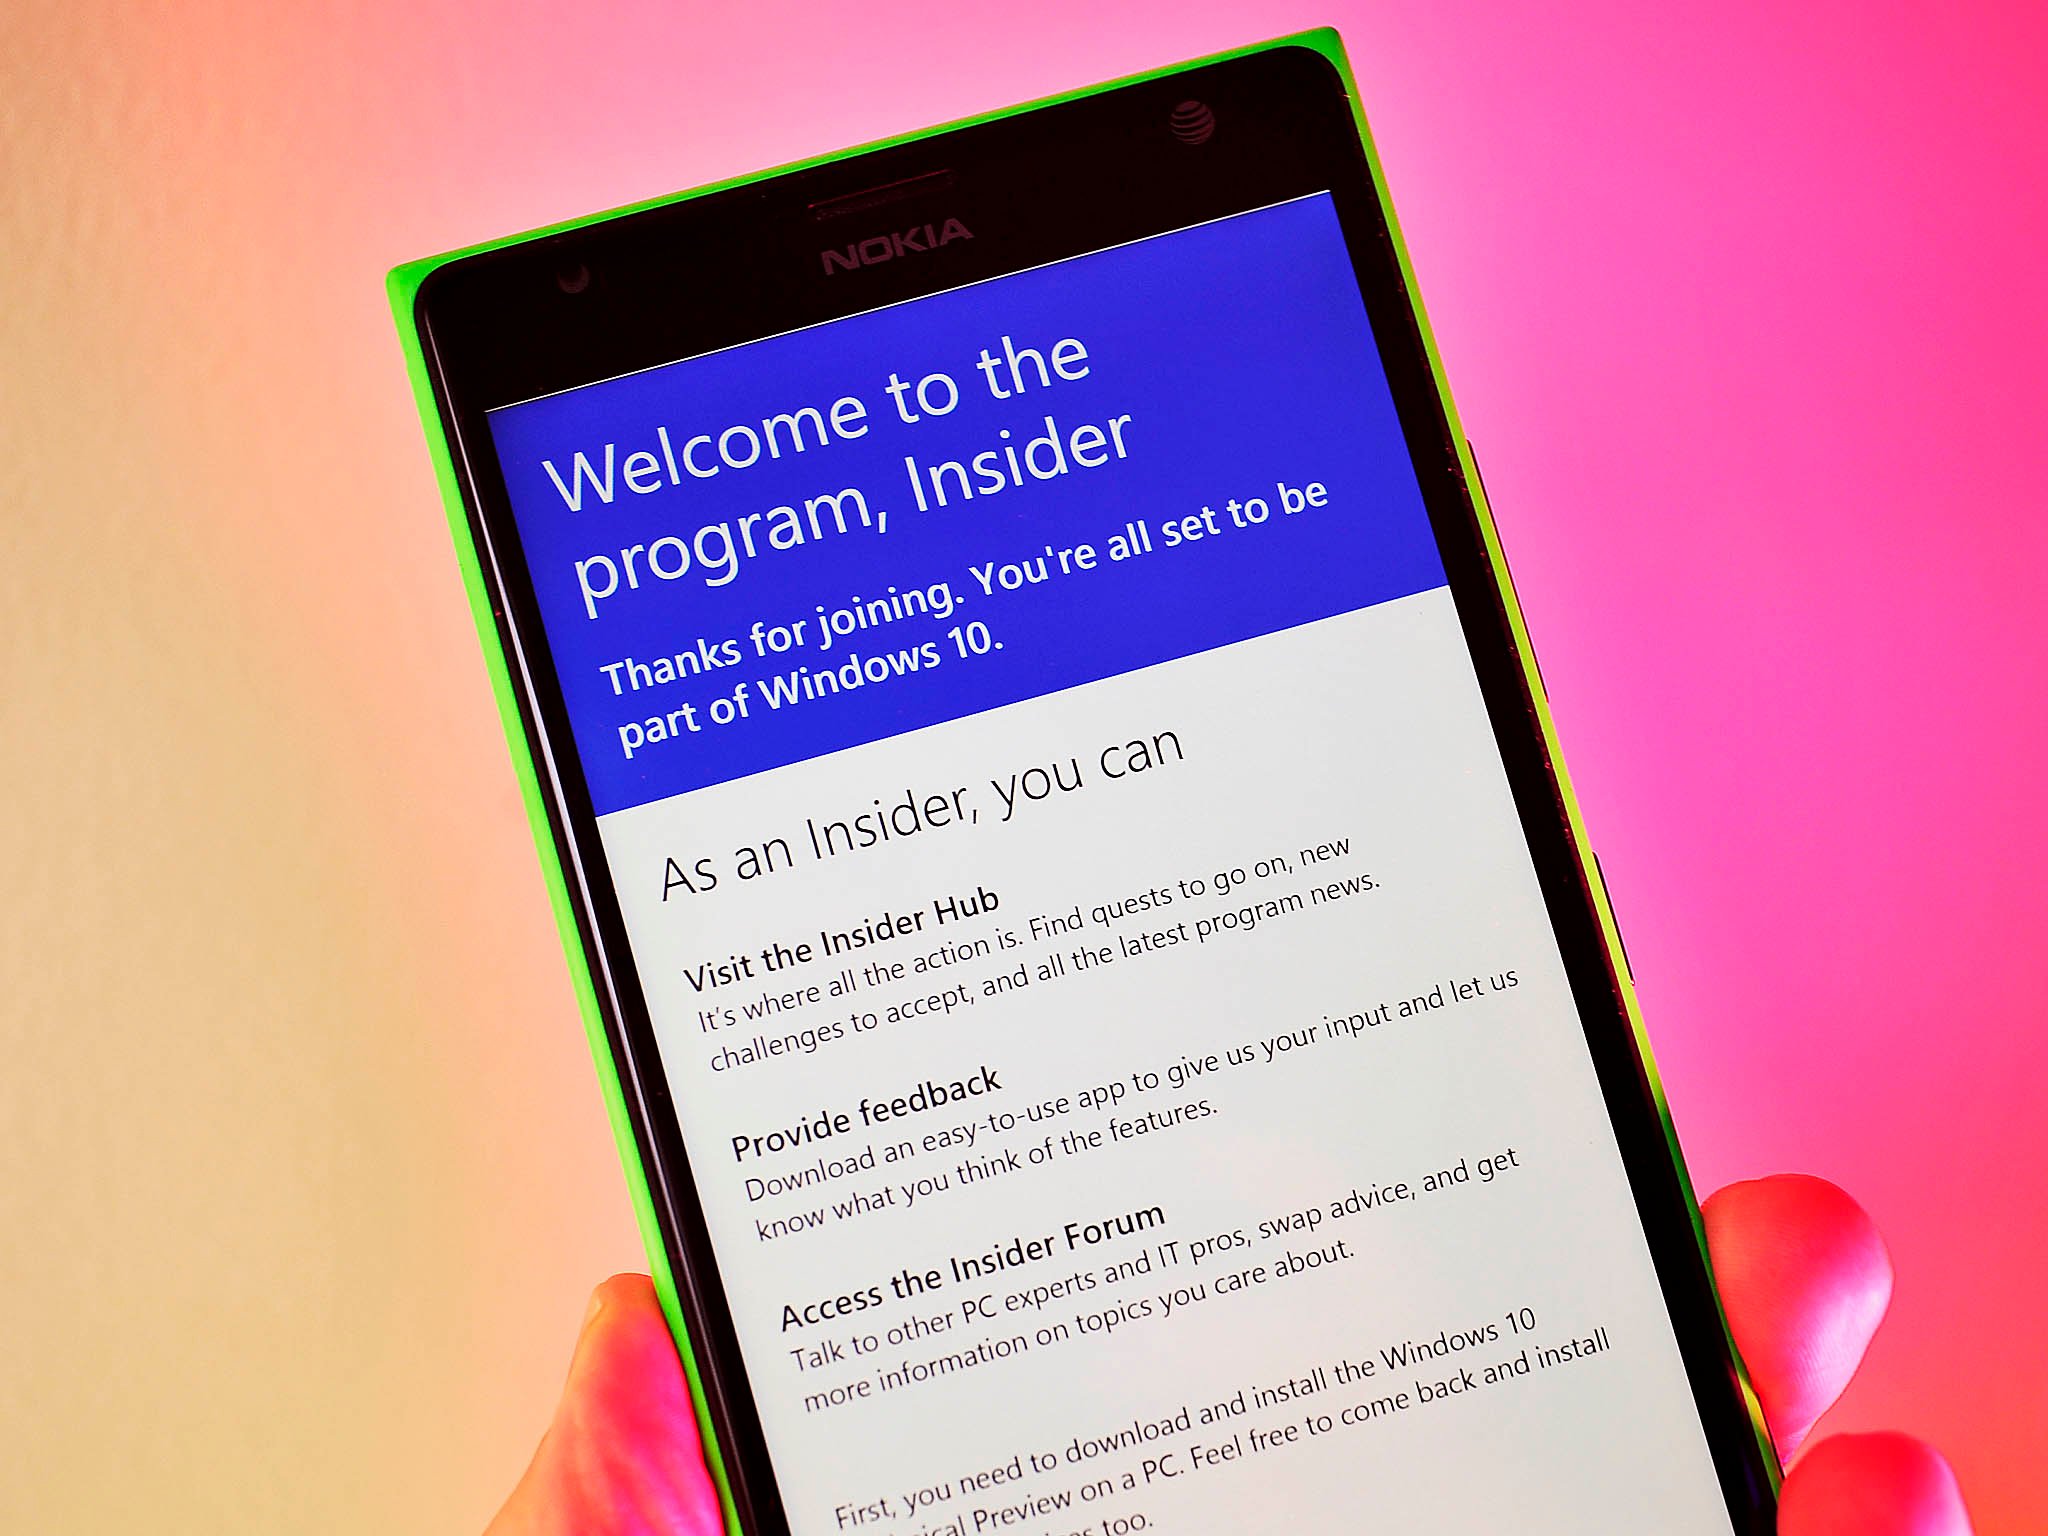 The first Windows 10 preview build for phones will support some 512MB devices